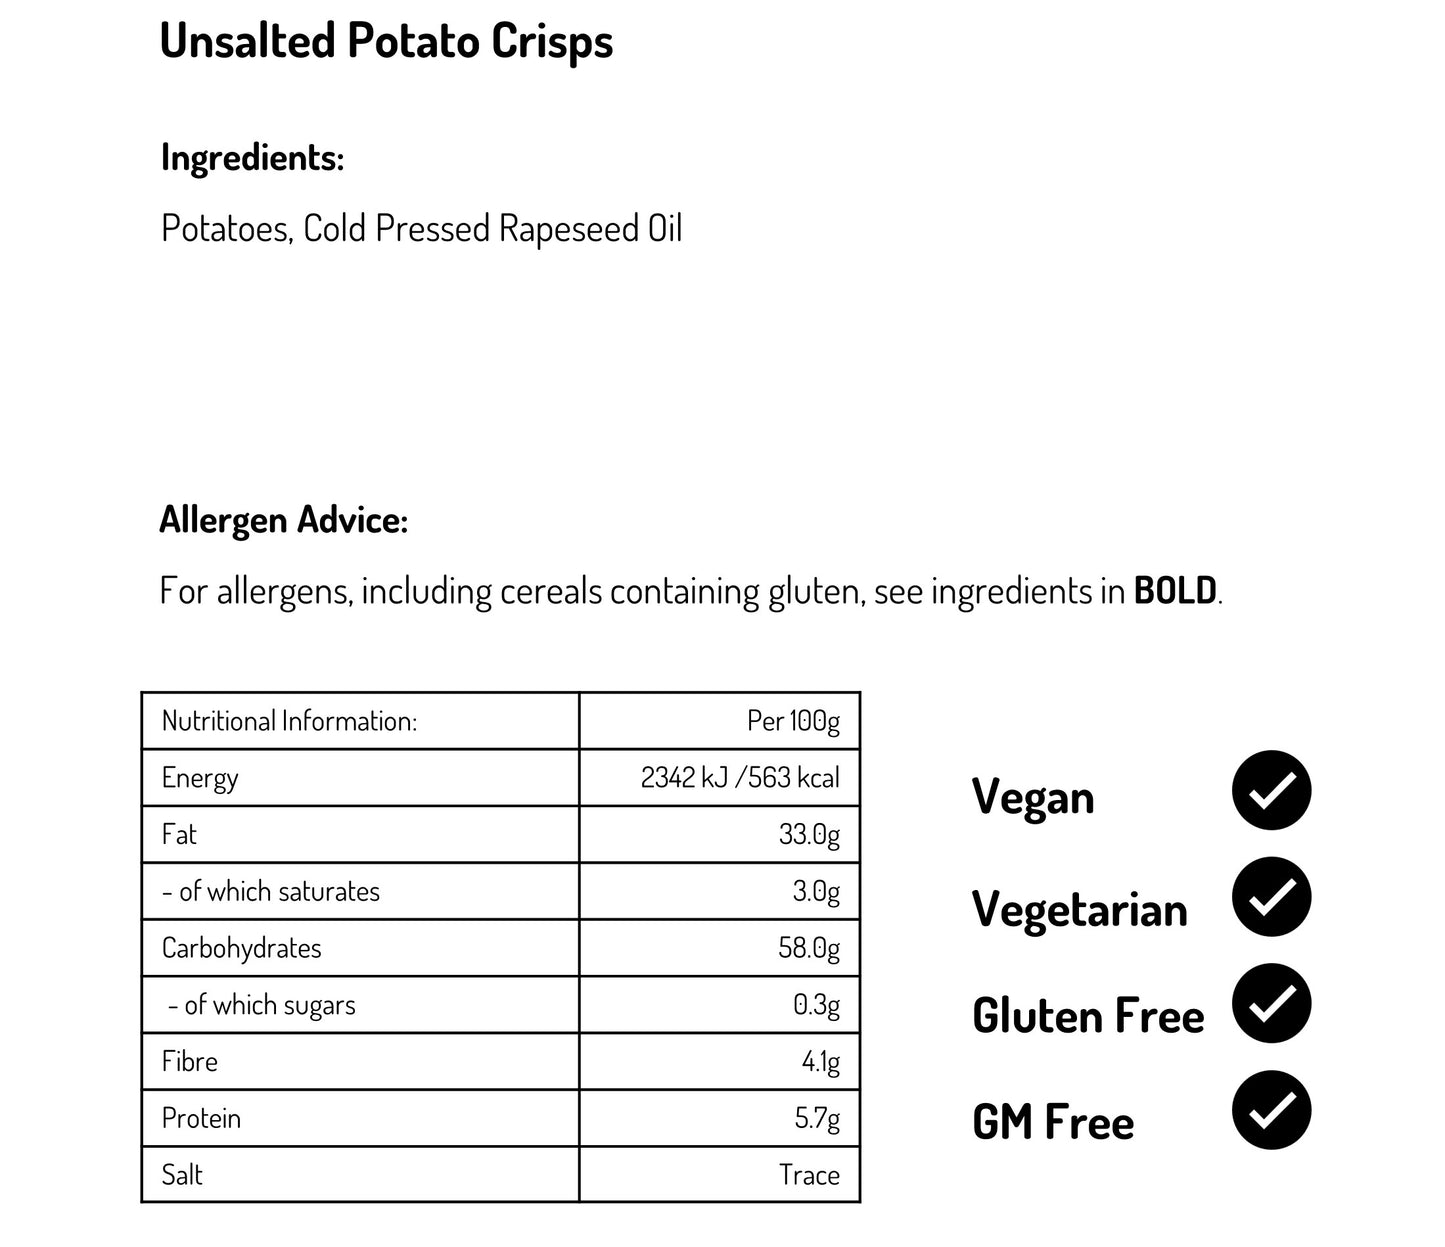 Unsalted Crisps 40g (Case of 24)